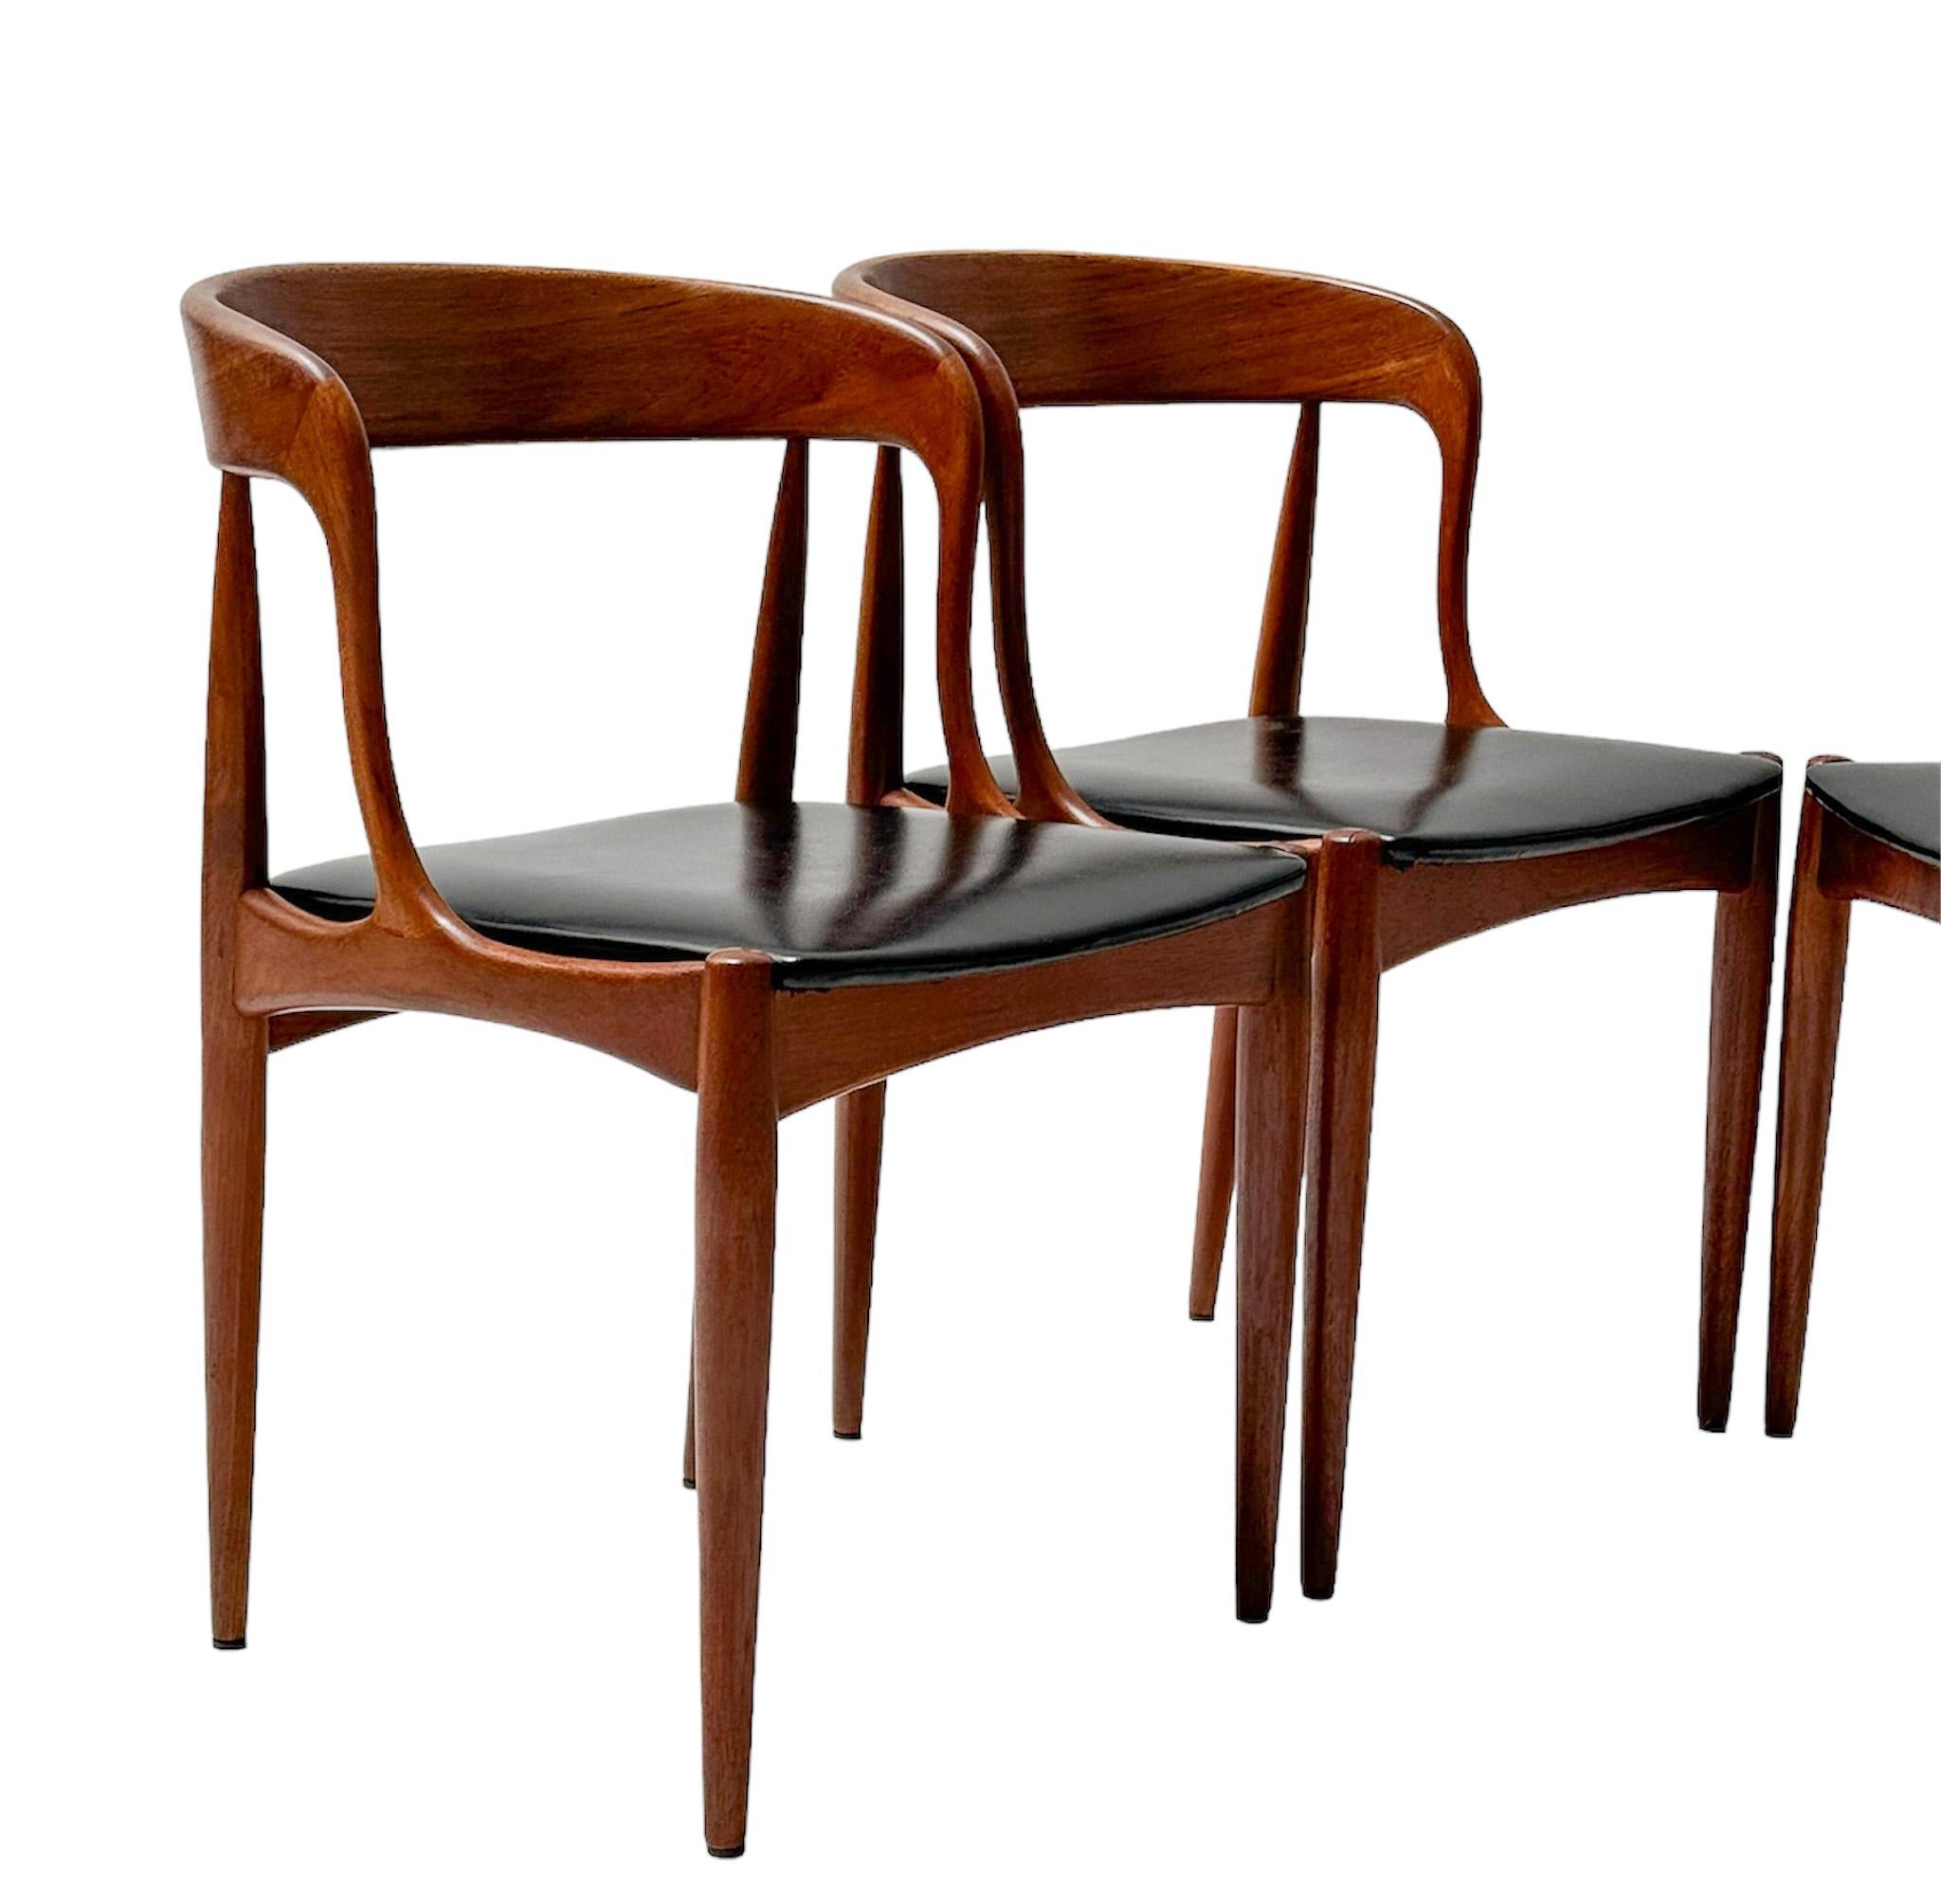 Mid-20th Century Four Teak Mid-Century Modern Dining Chairs by Johannes Andersen for Uldum, 1960s For Sale